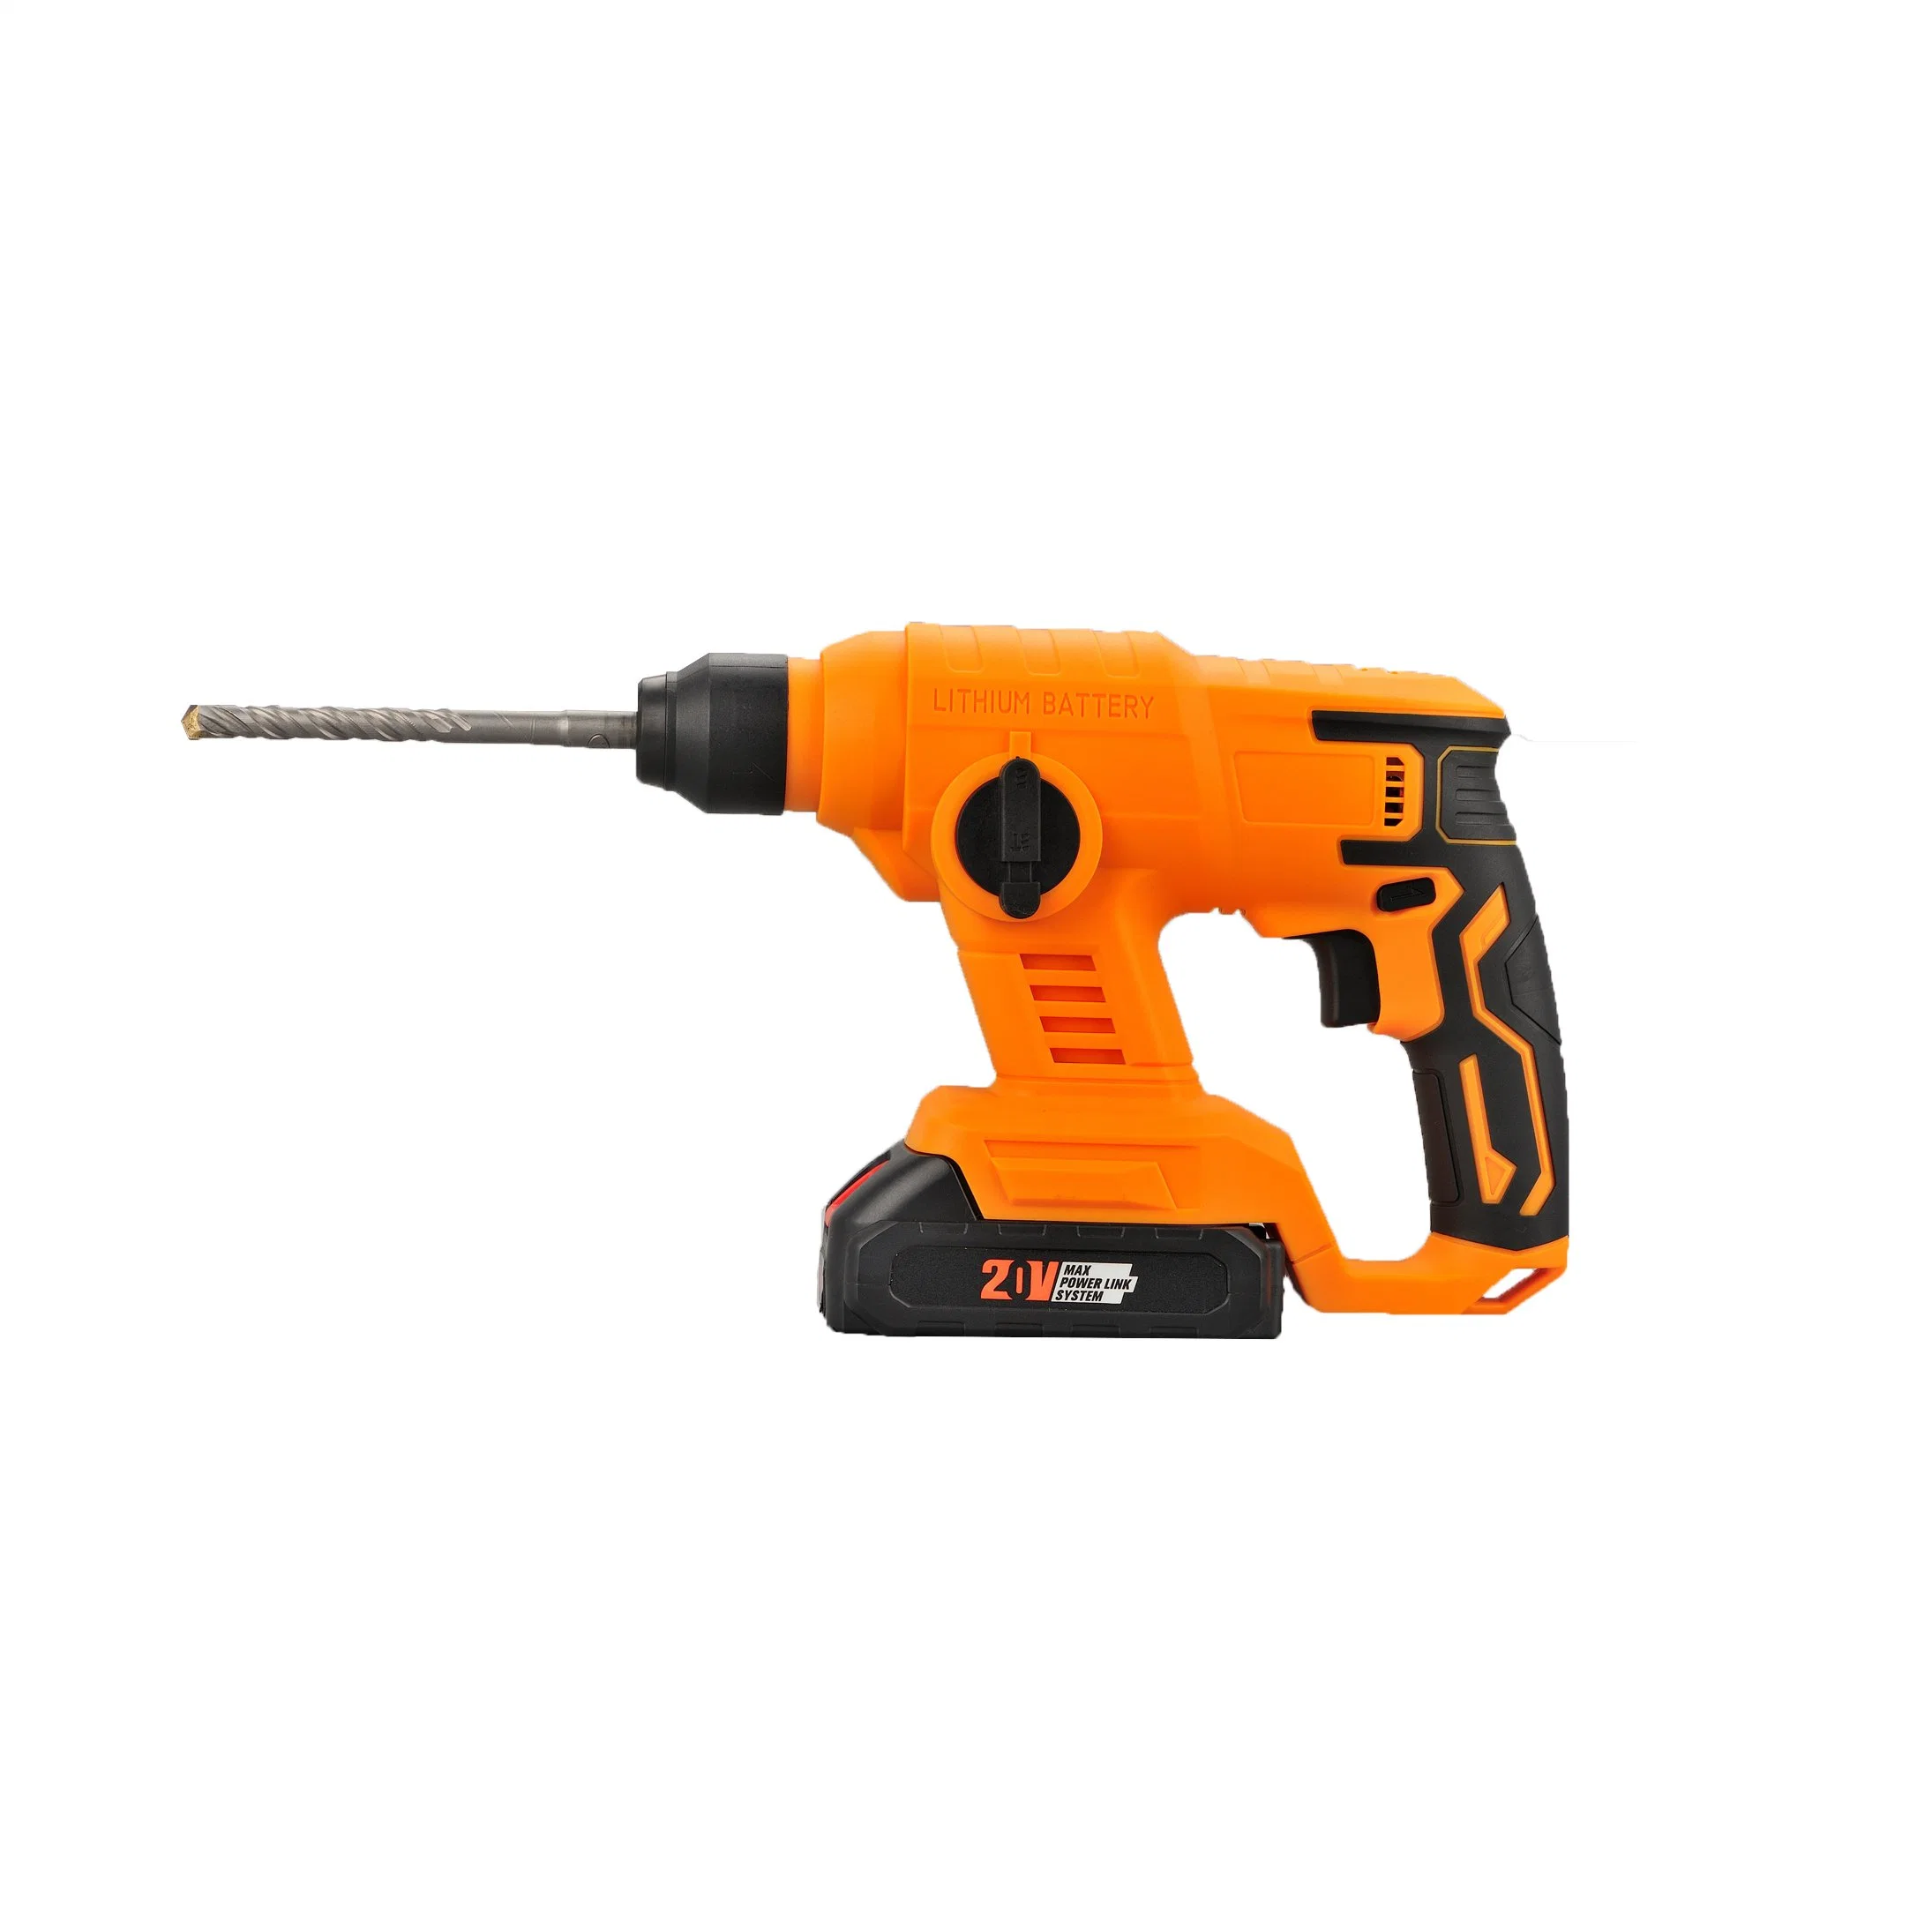 Youwe 21V Li-ion Battery Operated Rotary Electric Hammers C